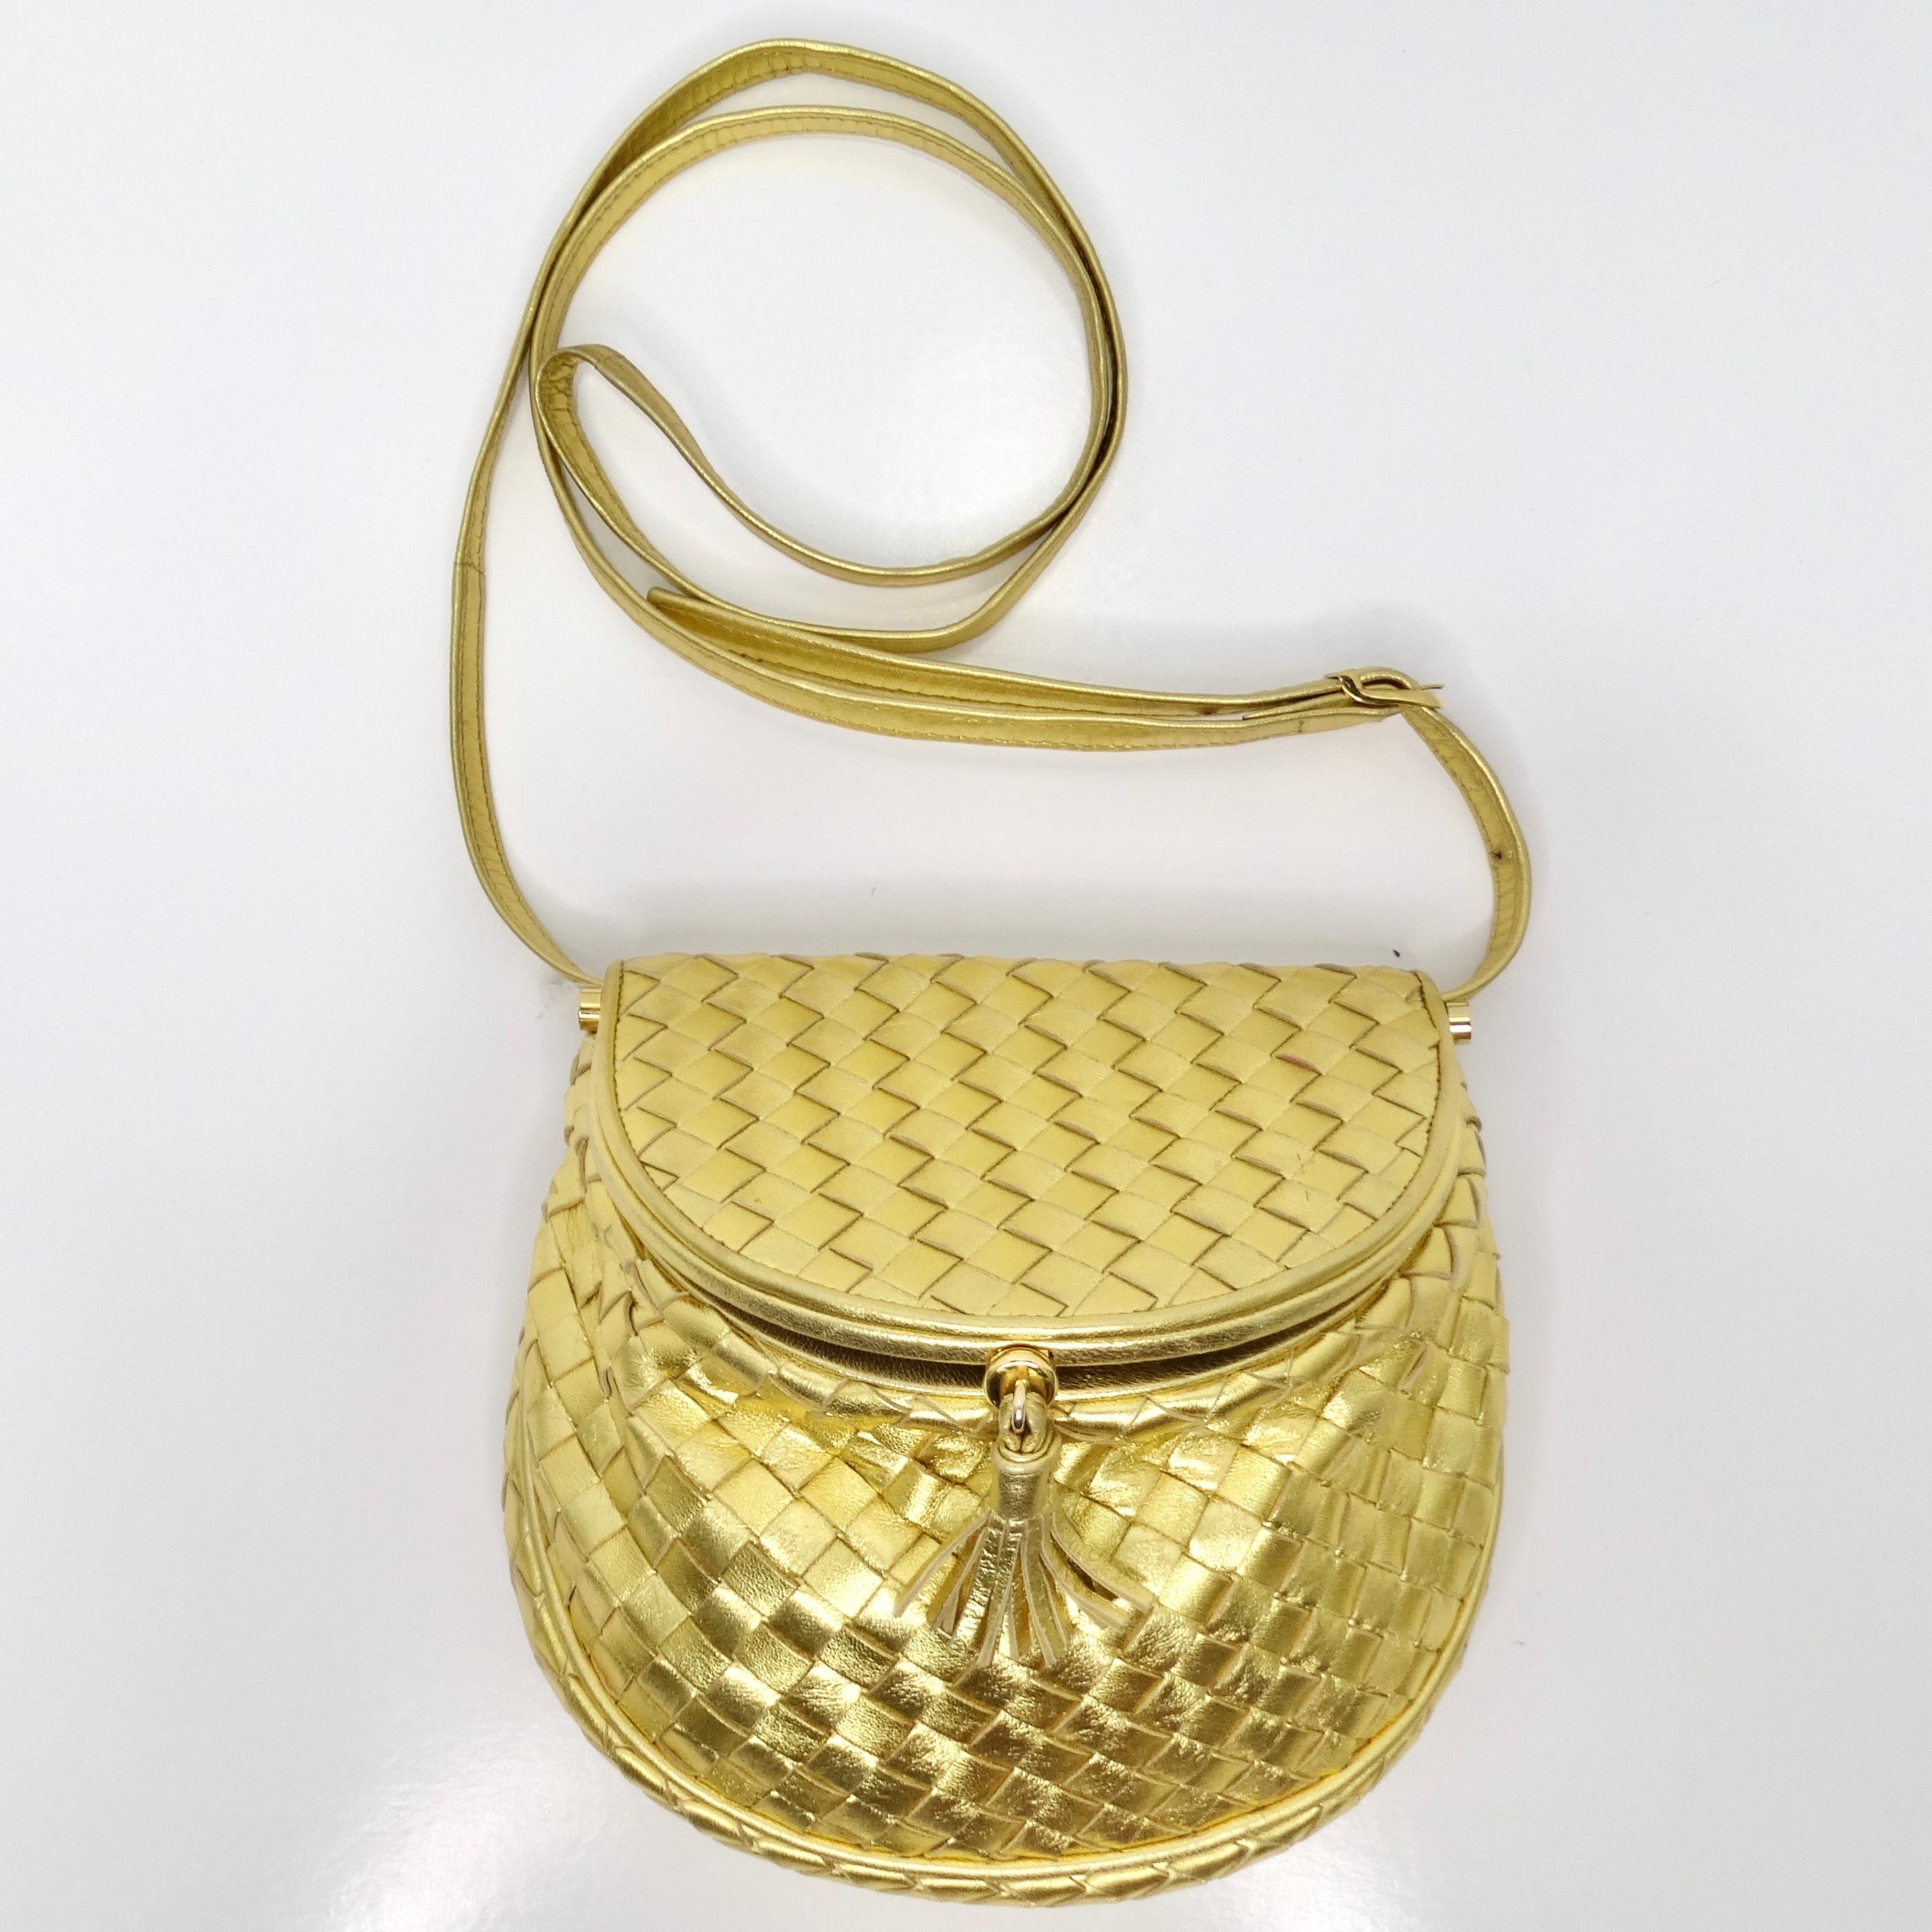 Introducing the Bottega Veneta 1980s Intrecciato Flap Crossbody Bag, a timeless piece that epitomizes the sophistication and elegance of the era. Crafted from luxurious metallic gold signature Bottega woven leather, this mini flap bag is a statement